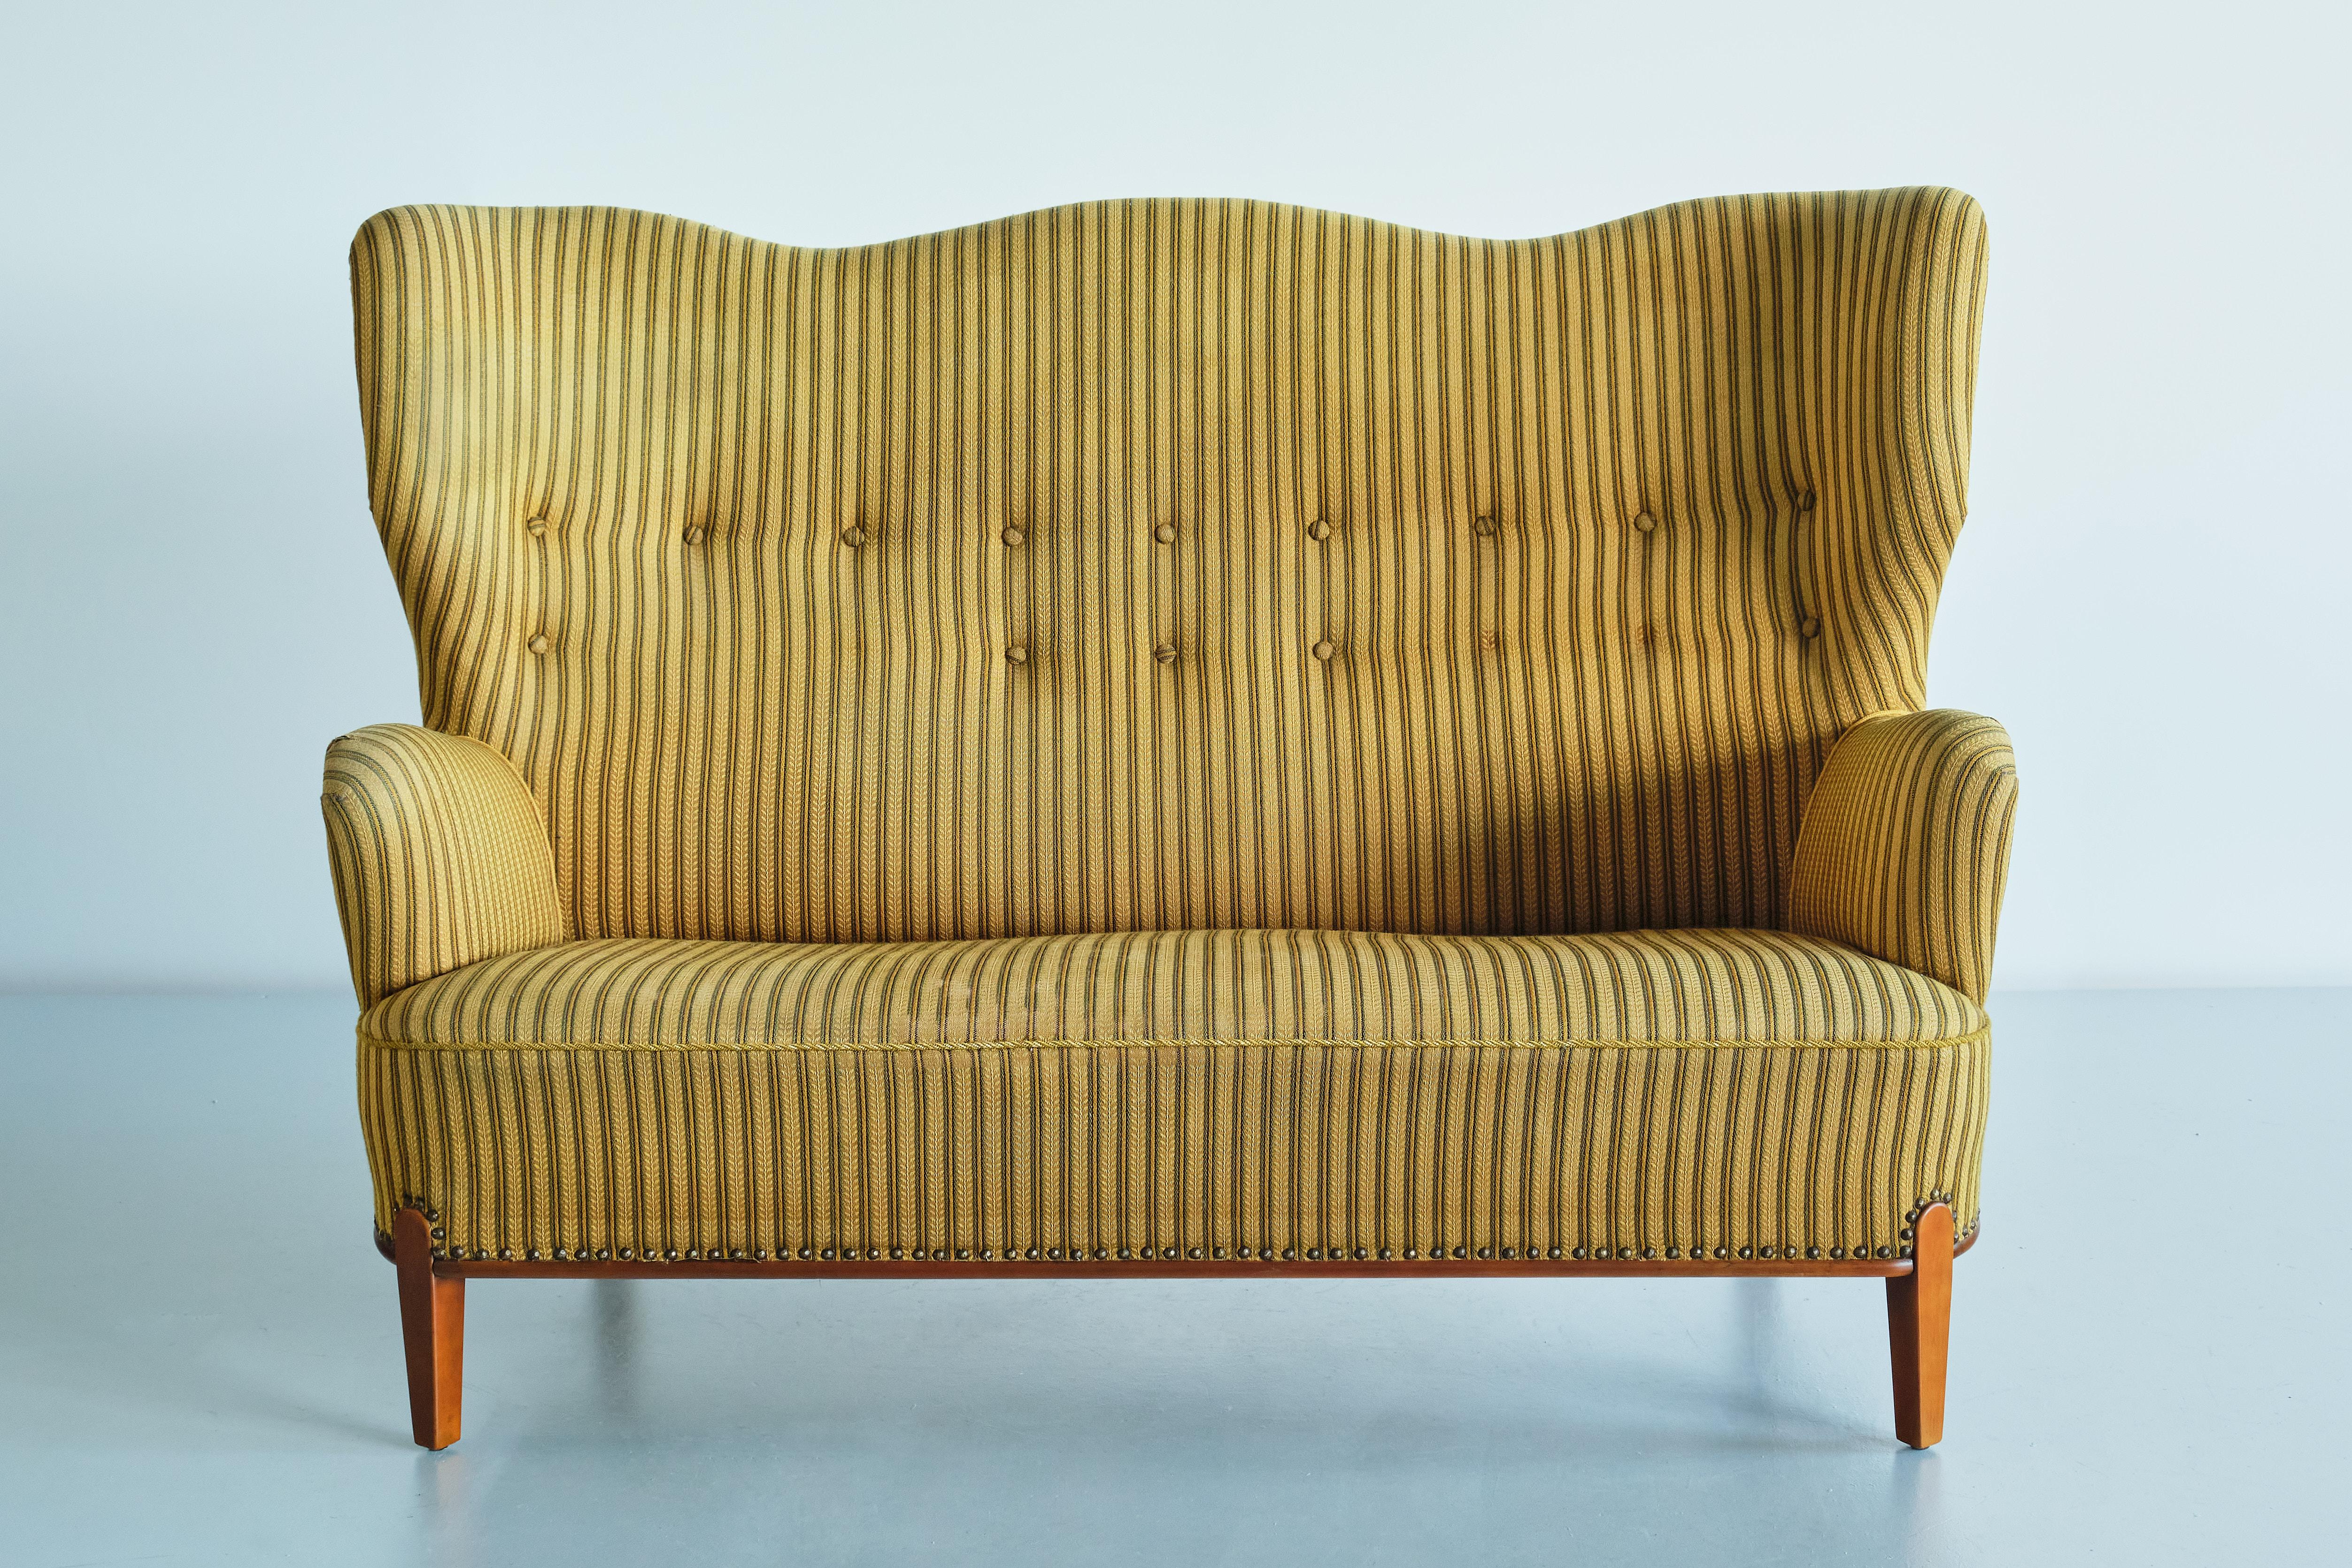 This sculptural sofa was designed by Bertil Söderberg and produced by Nordiska Kompaniet in Sweden in the 1940s. The rare design is marked by the curved lines of the buttoned back rest, ending in wing shaped sides and upholstered arm rests. A